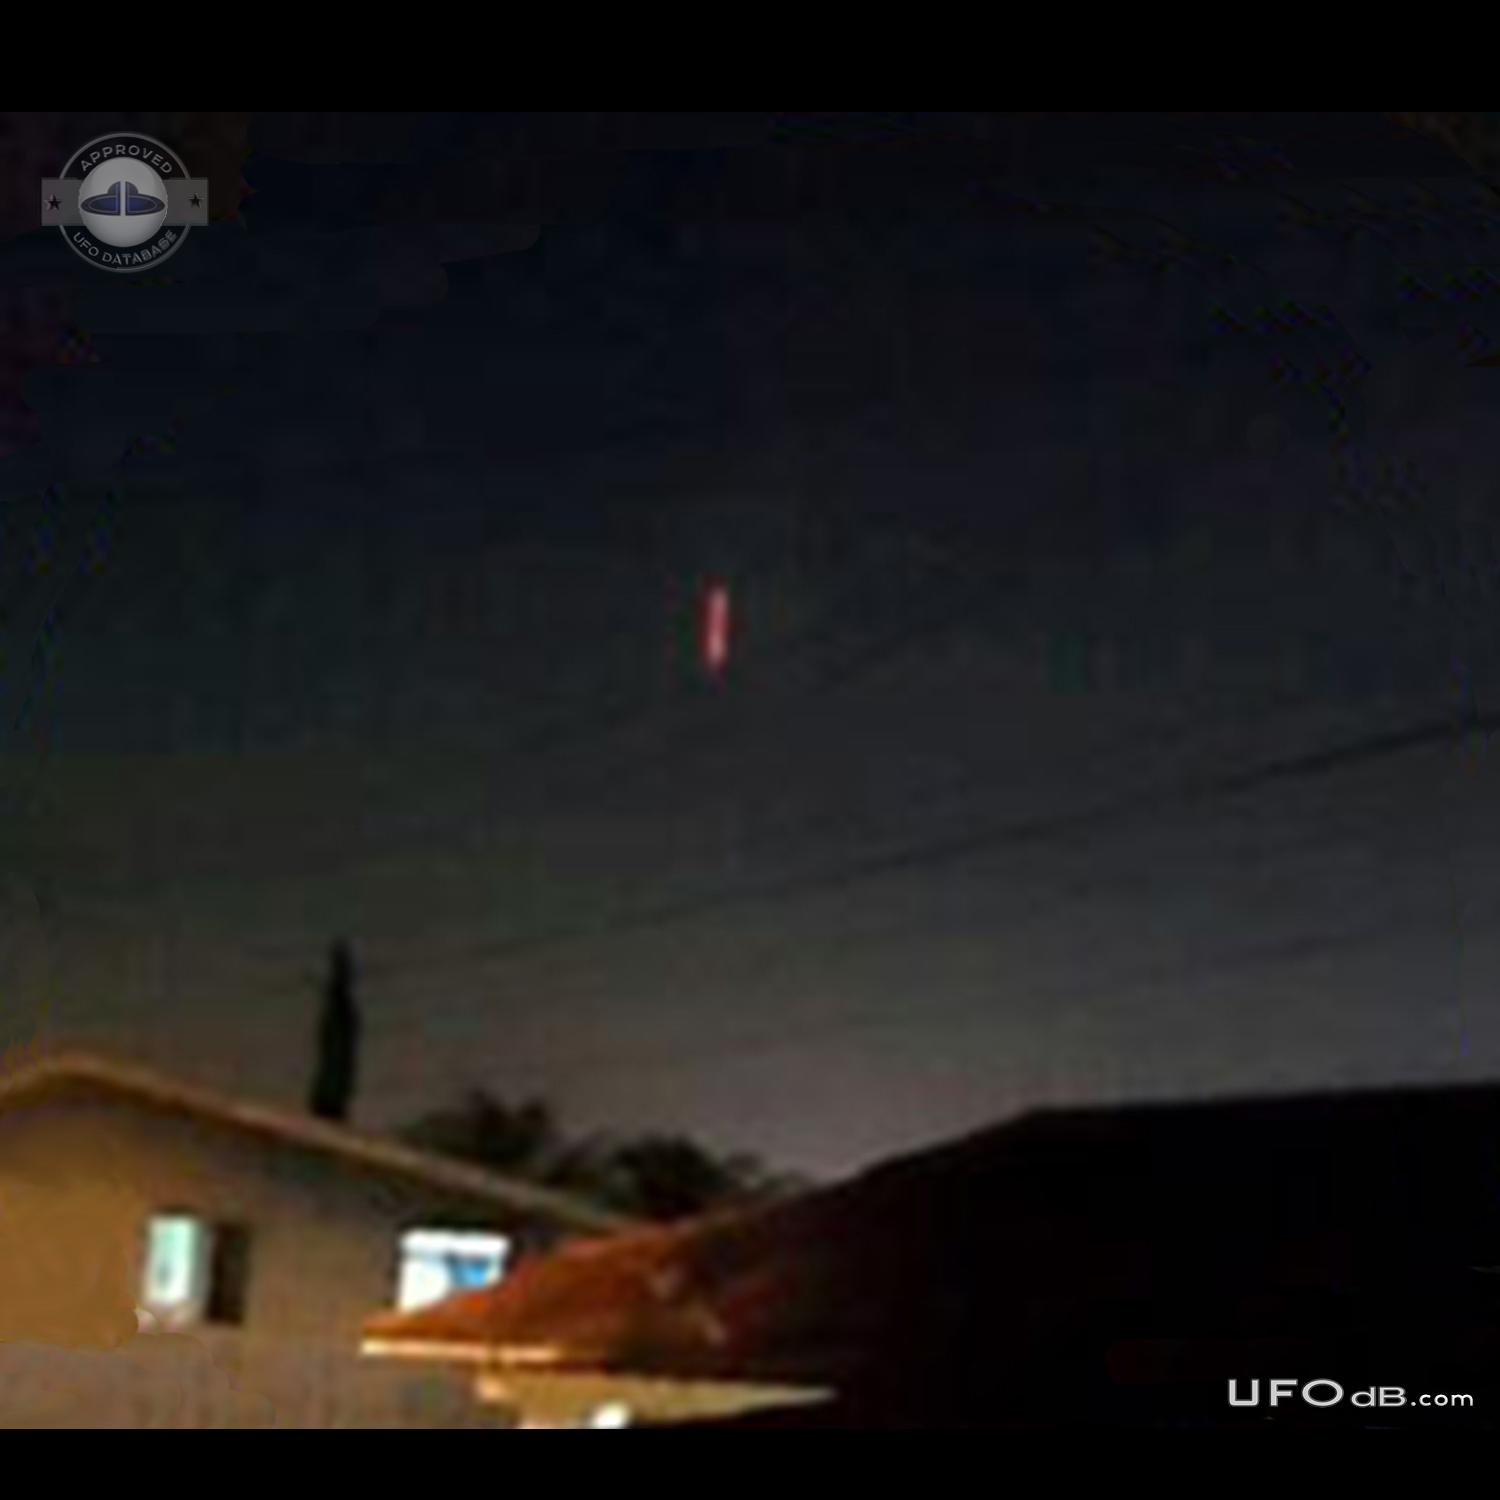 Red light mystery UFO gets the News in Penampang, Malaysia 2014 UFO Picture #588-1